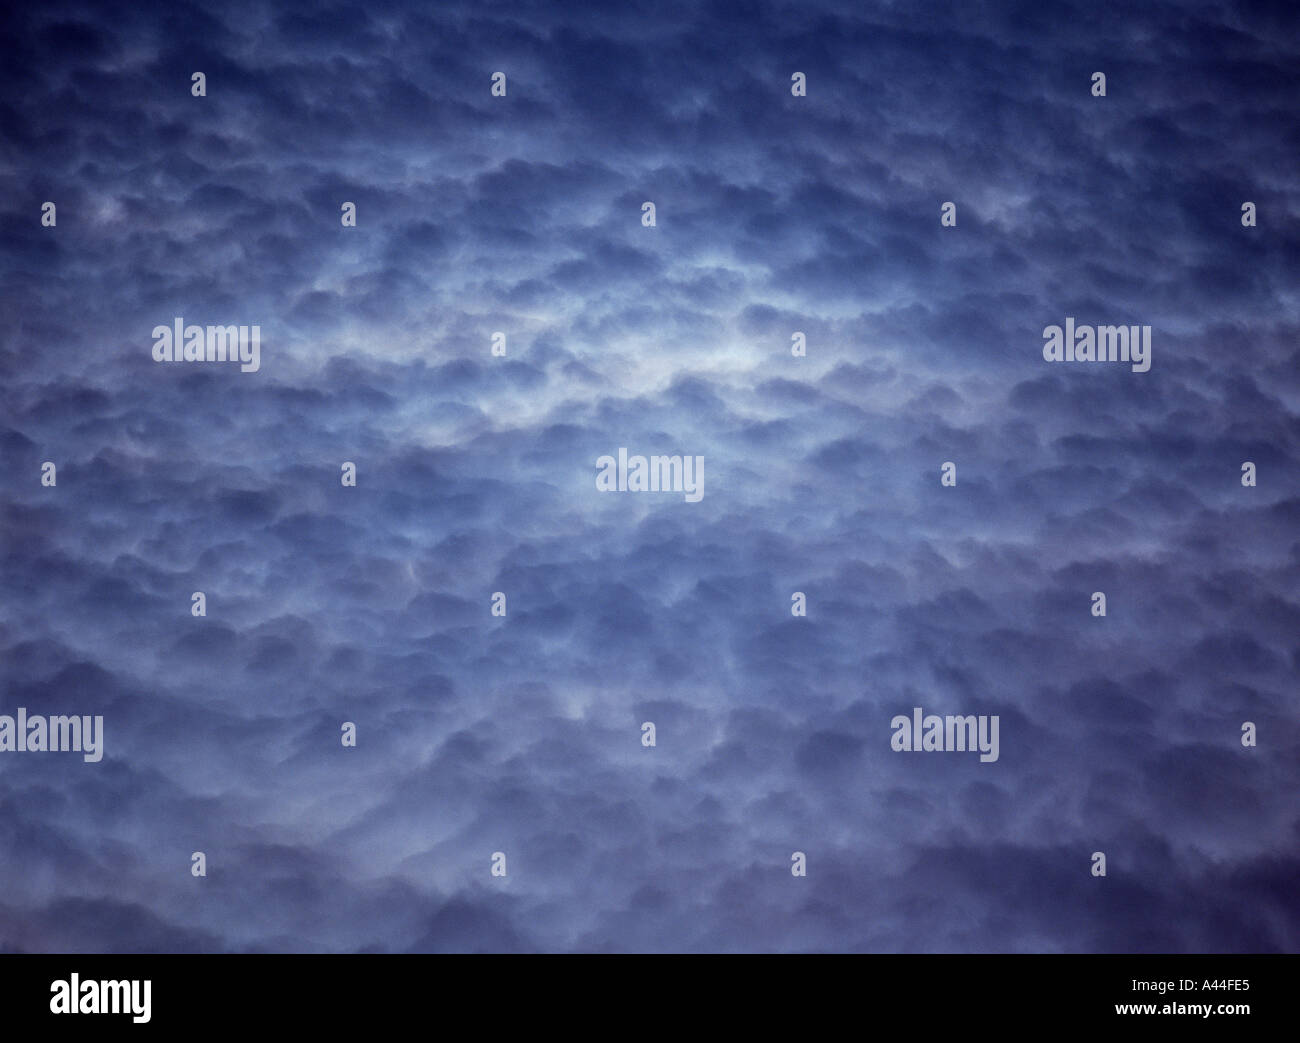 dh Clouds SKY WEATHER Pattern grey cloud with light area in middle Orkney Stock Photo